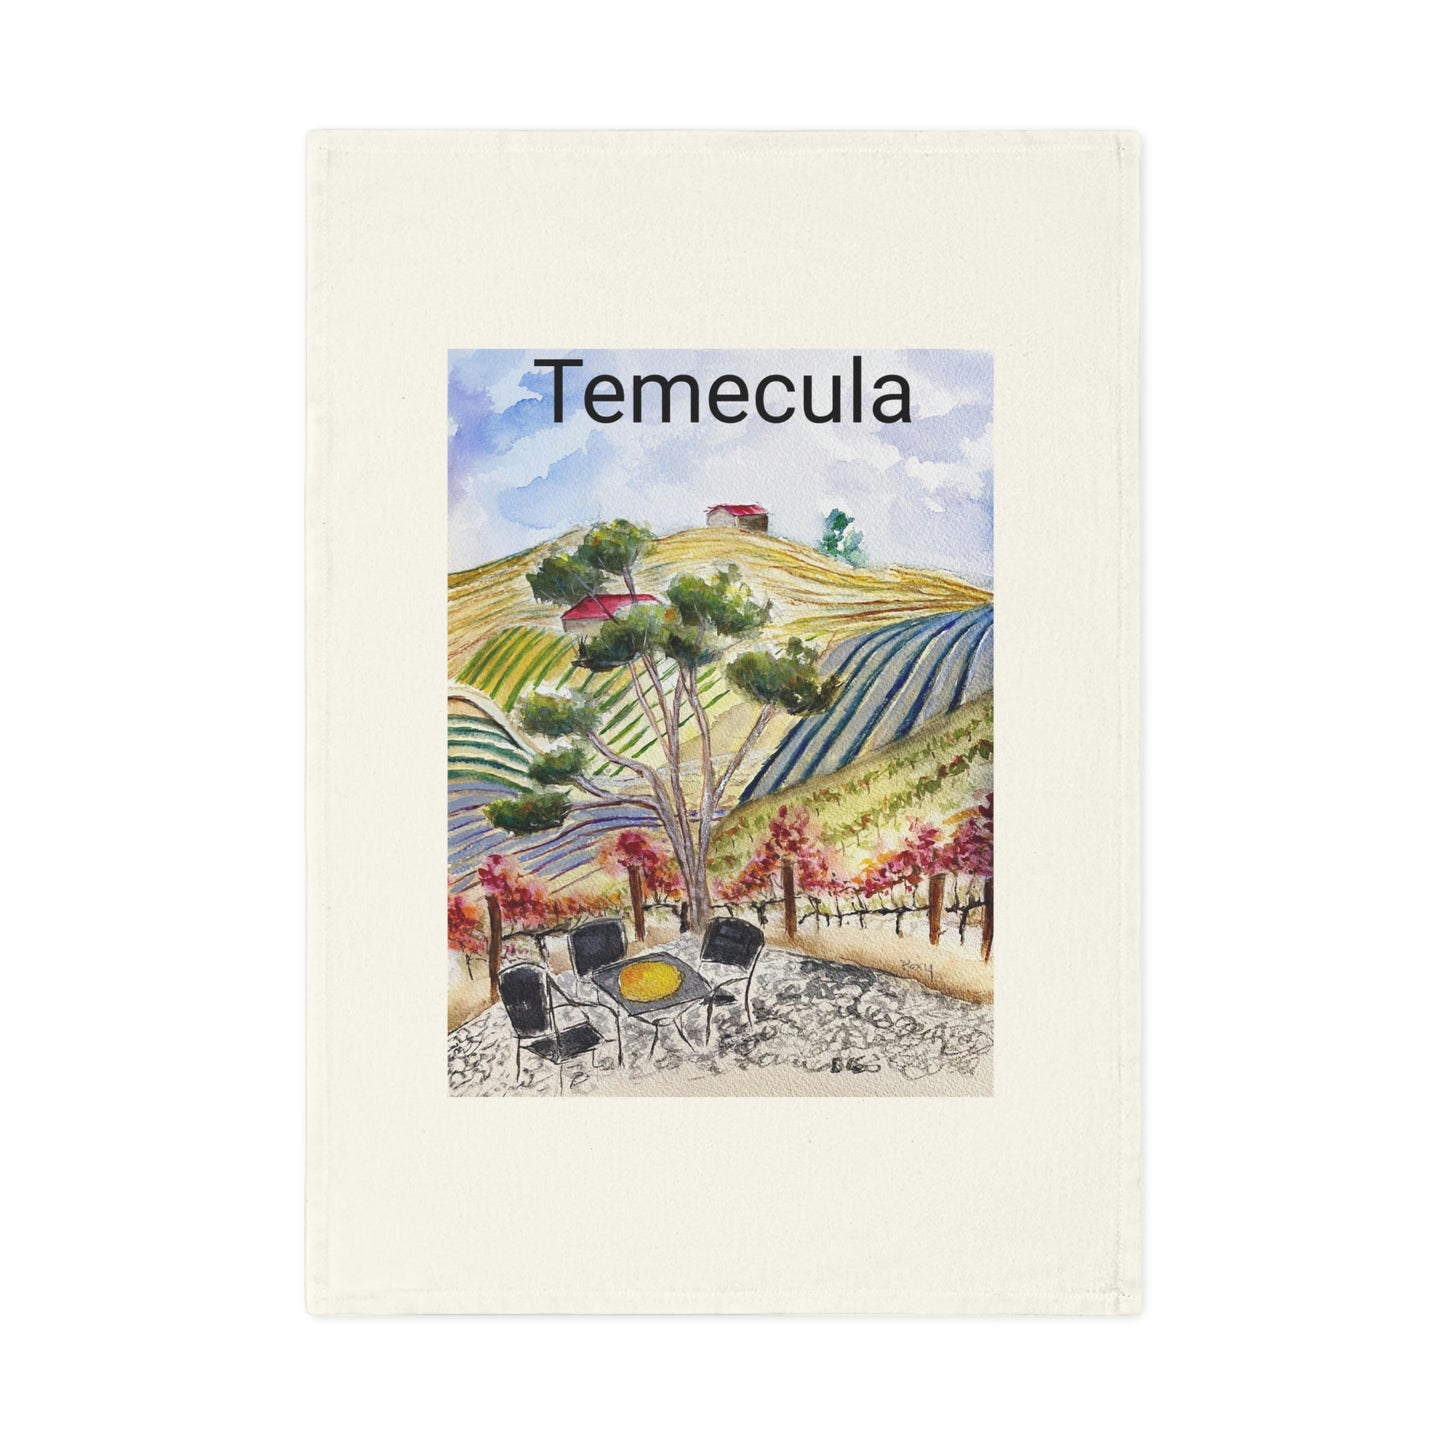 Temecula Organic Vegan Cotton Tea Towel  With View from the Patio at GBV and "Temecula"